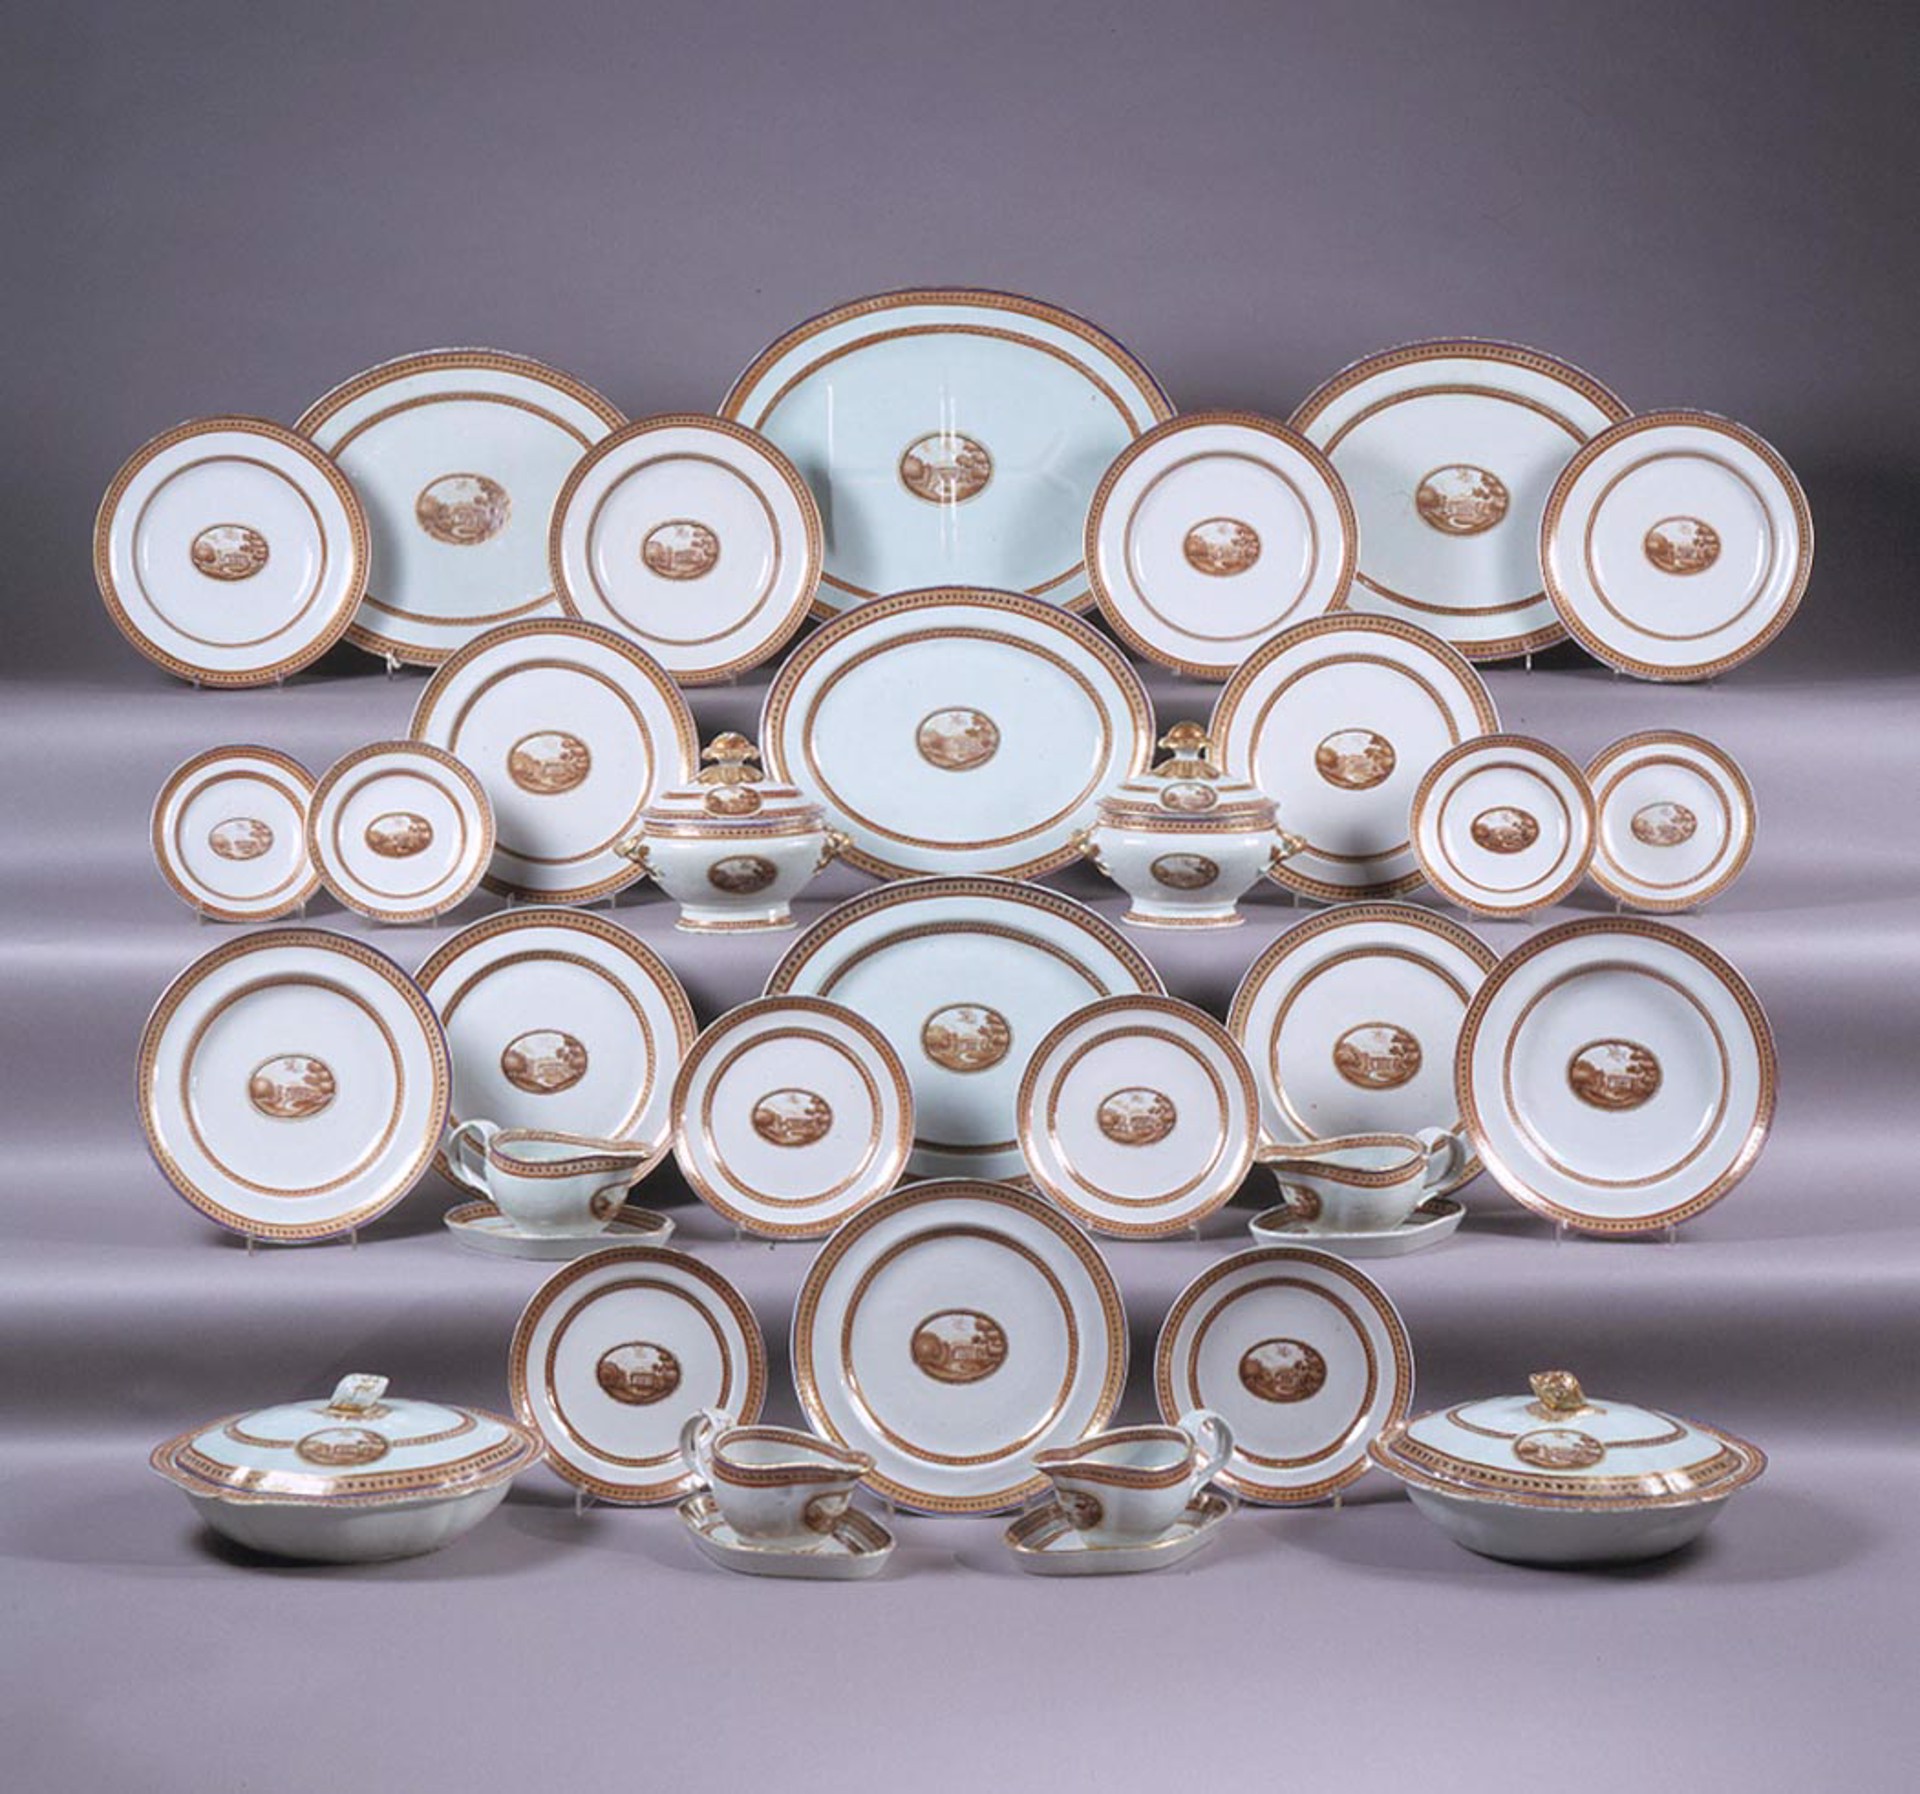 90-PIECE CHINESE EXPORT DINNER SERVICE